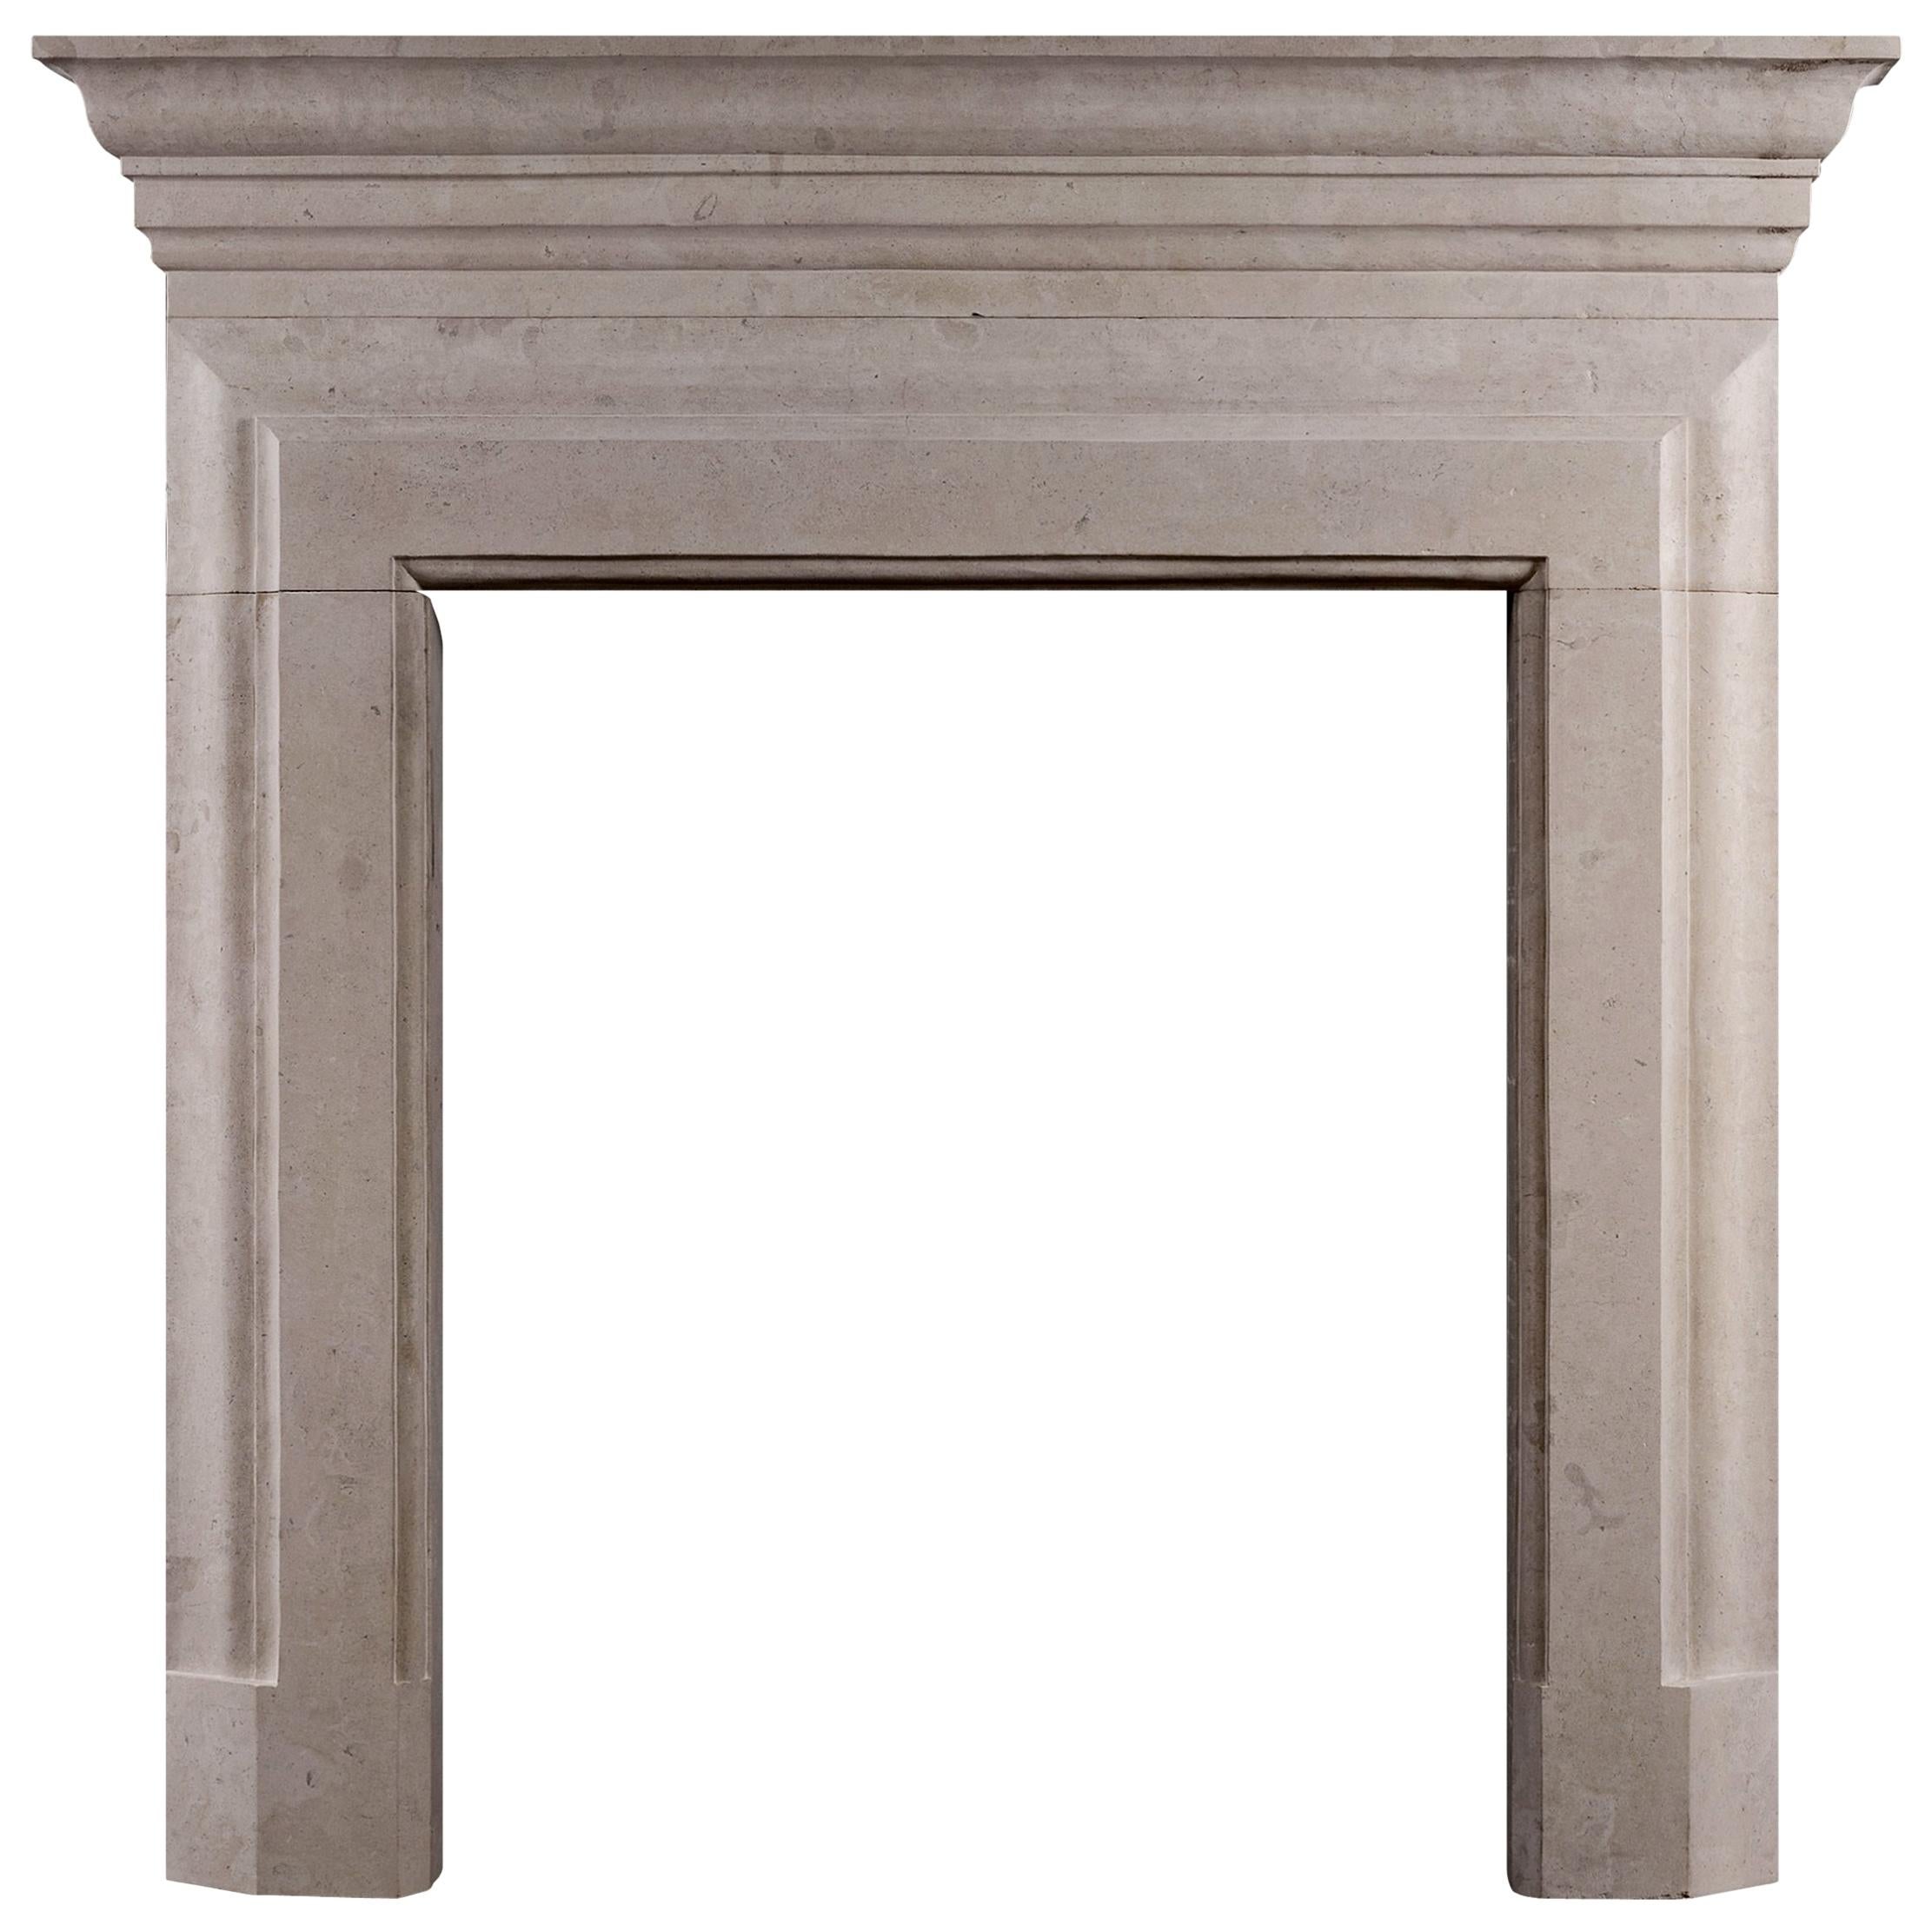 English Limestone Fireplace of Architectural Form For Sale